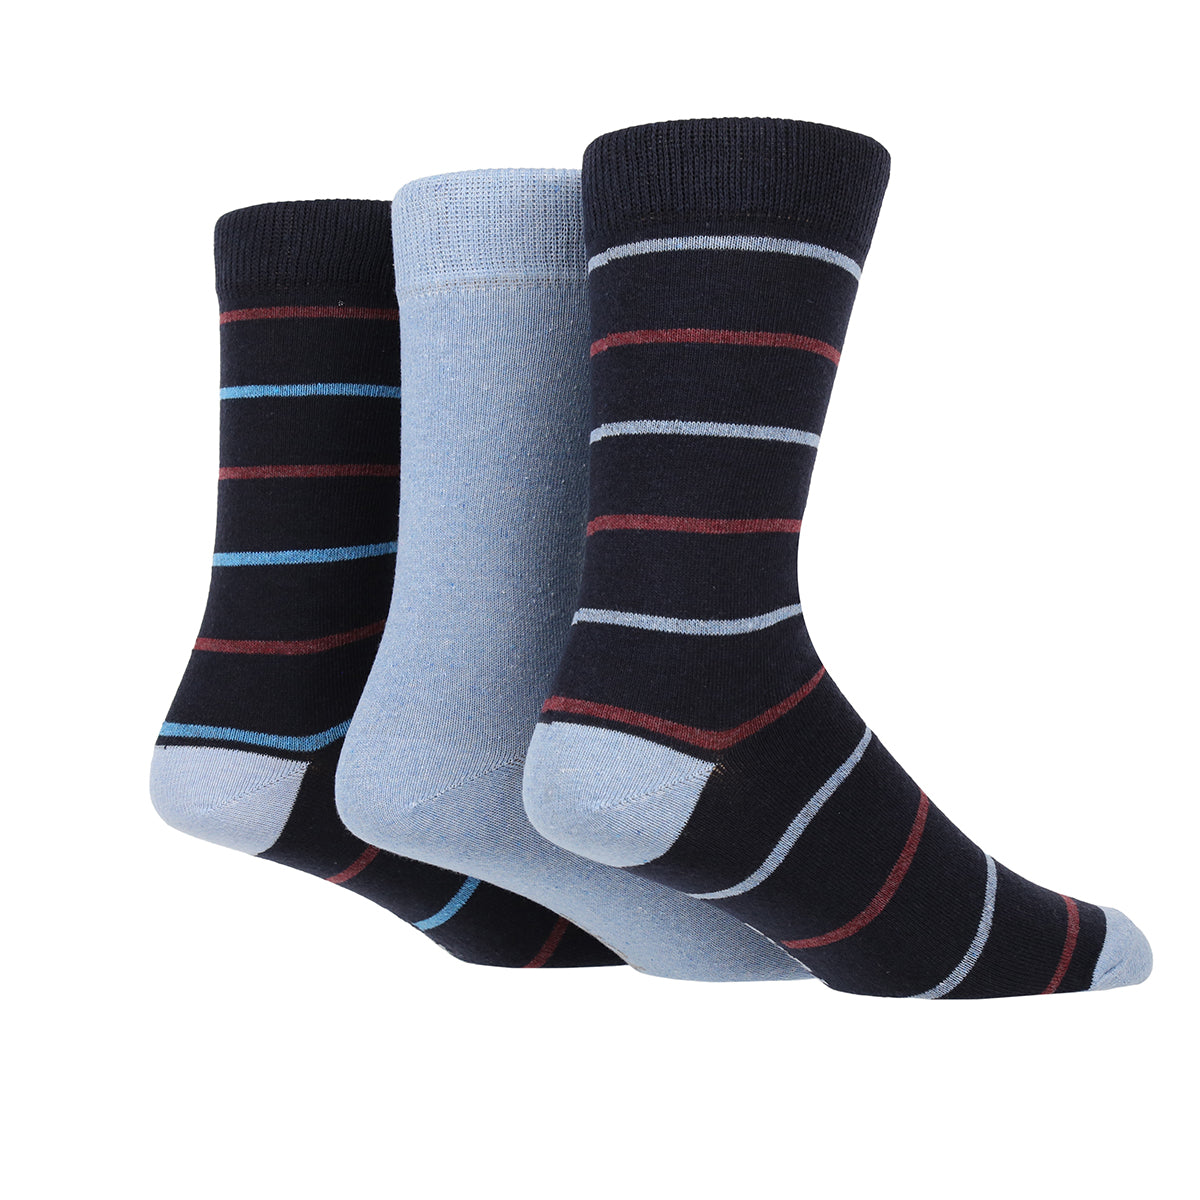 Men's Socks with Stripes - 3 Pairs